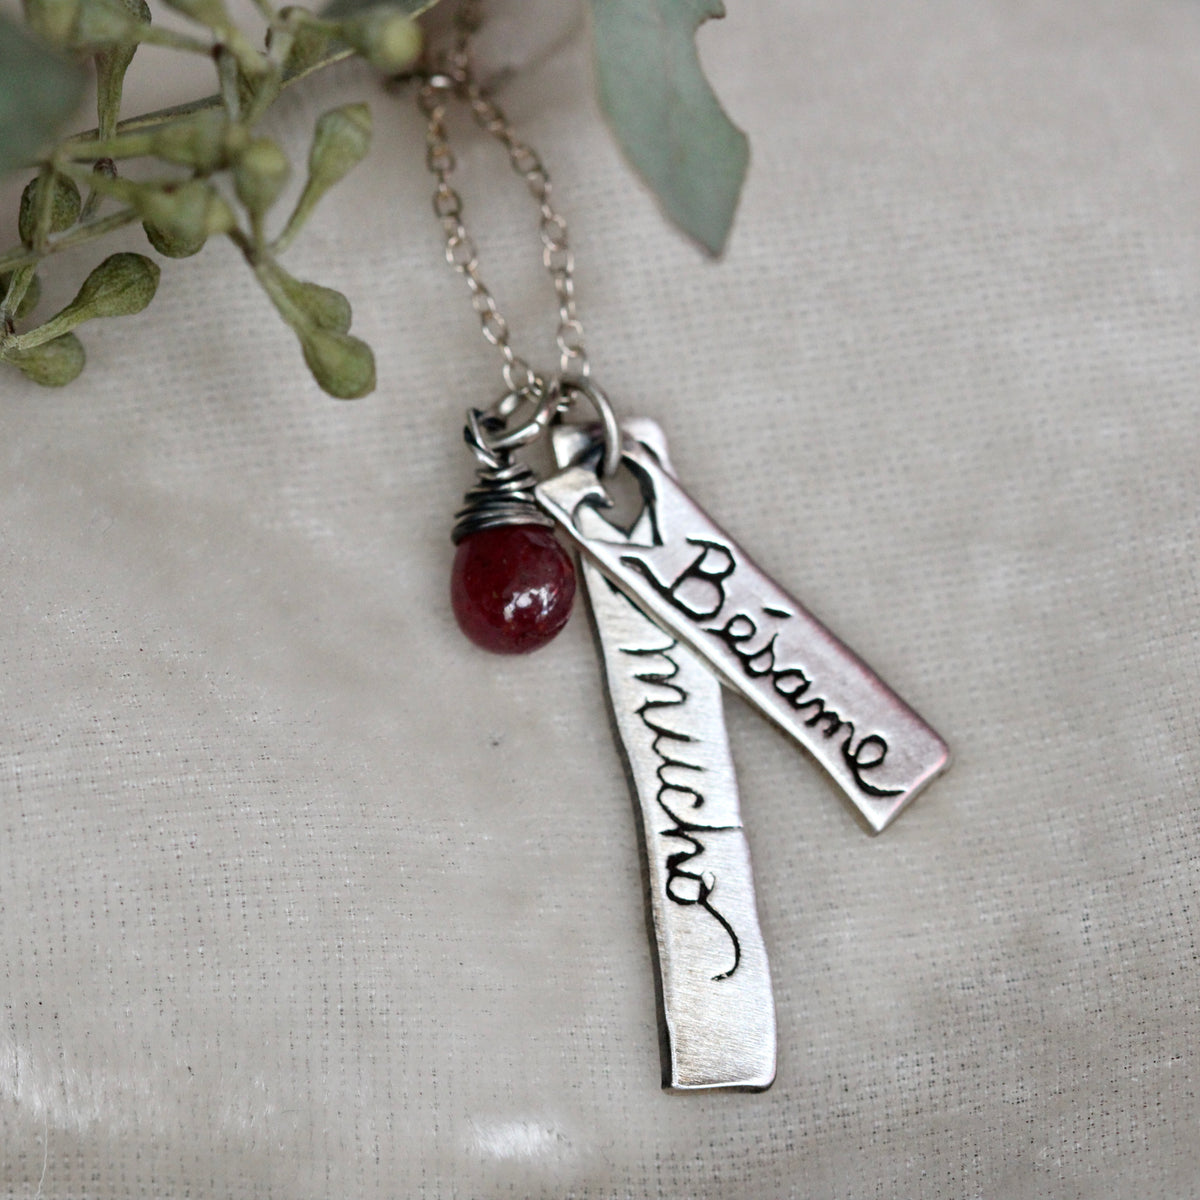 Beseme Mucho Sterling silver and ruby necklace